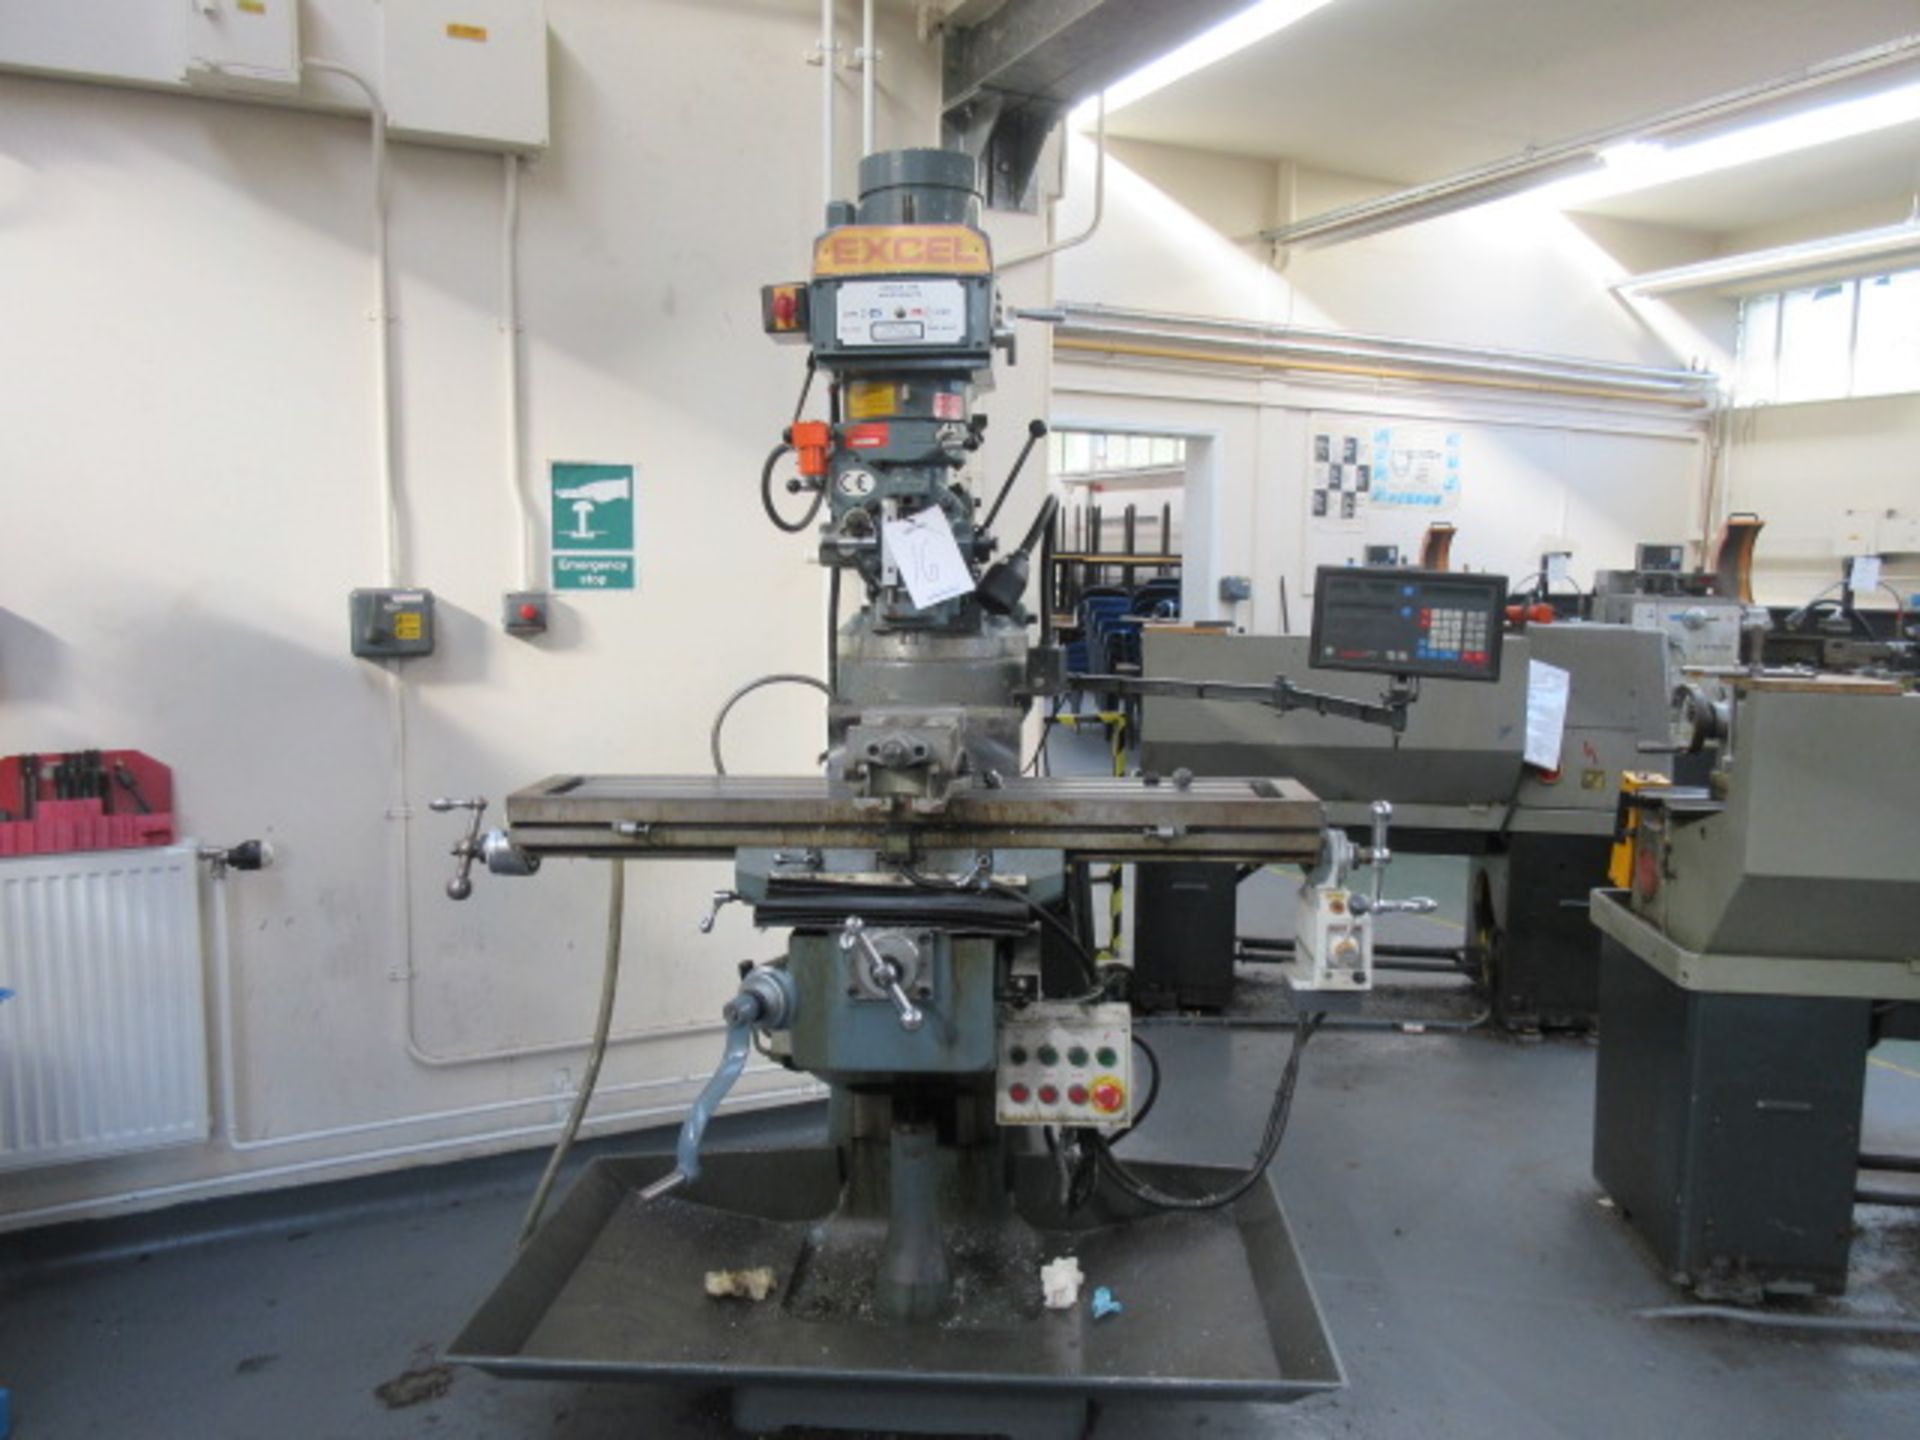 Excel XLTM 2VS turret mill with 49" x 9" table, power feed, Newall DP8 2 axis dro & 6" machine vice.